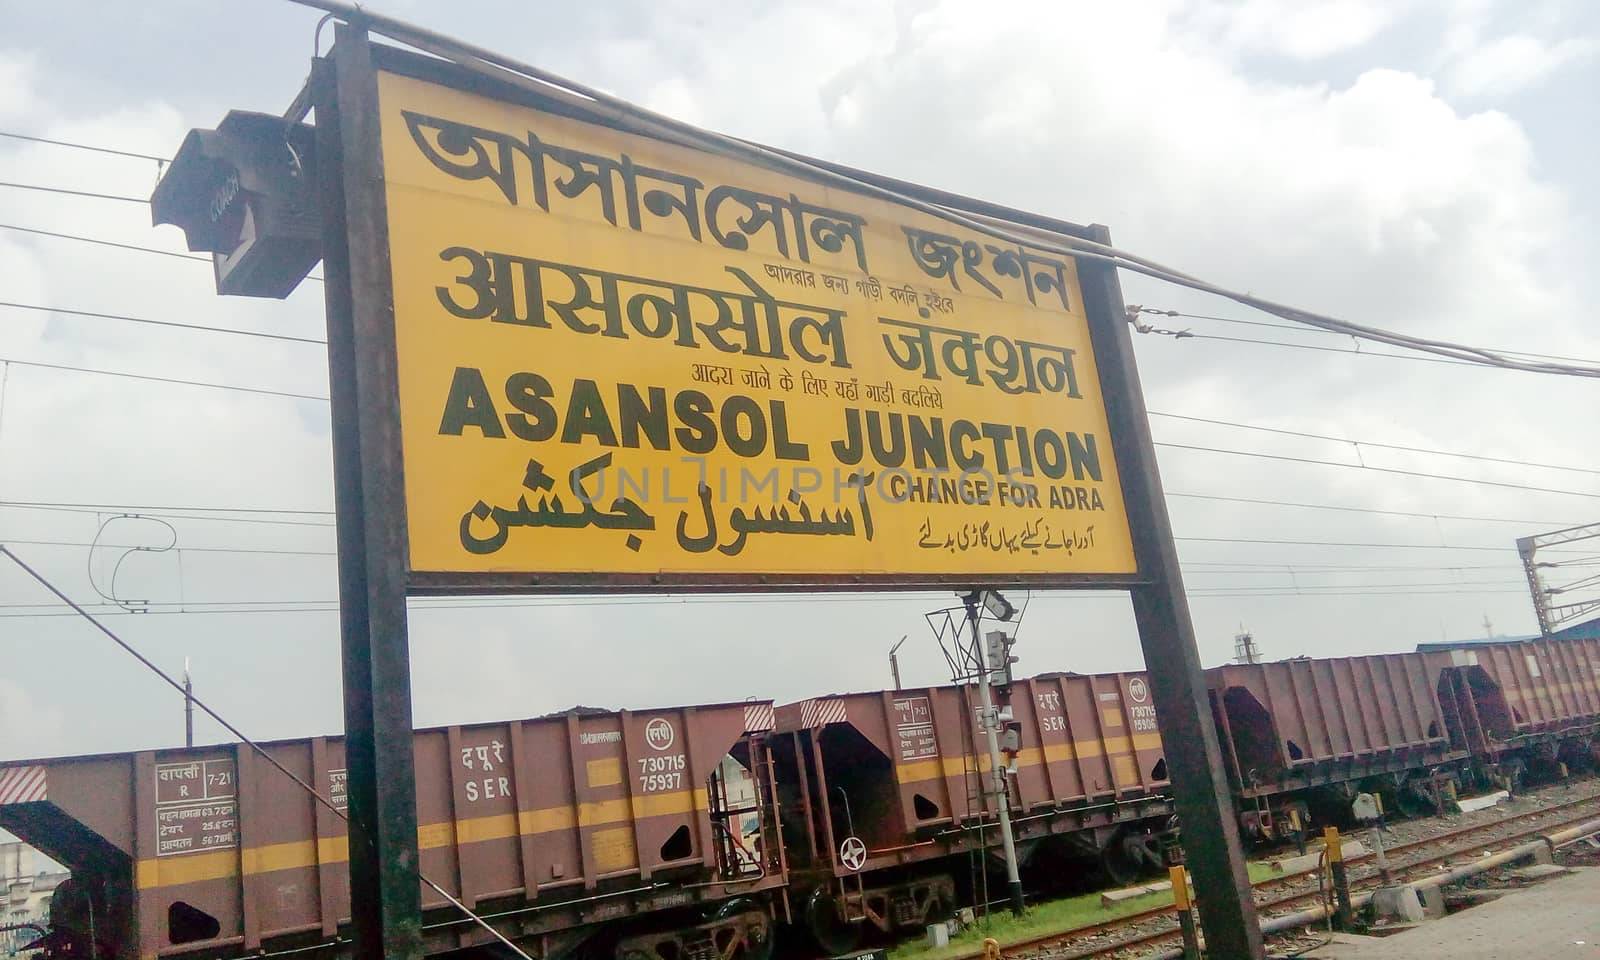 Asansol Junction Indian railway station Division of Eastern Railway Zone in Asansol Sadar subdivision of Paschim Bardhaman district West Bengal India South Asia Pac August 2019